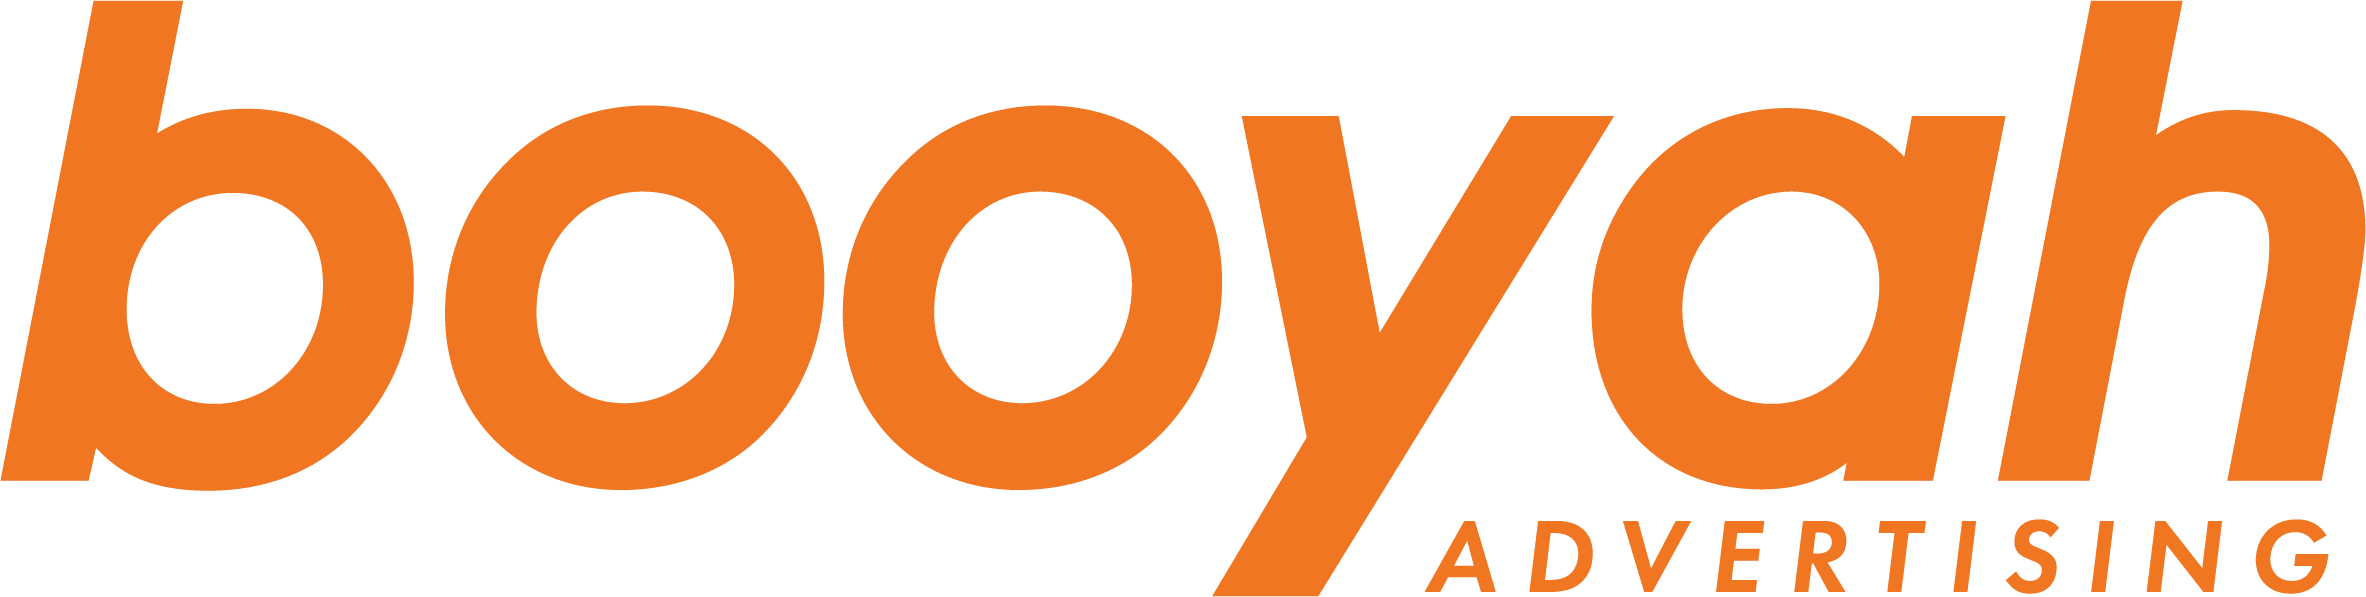 Digital Marketing Agency  Grow Your Brand with Booyah Advertising